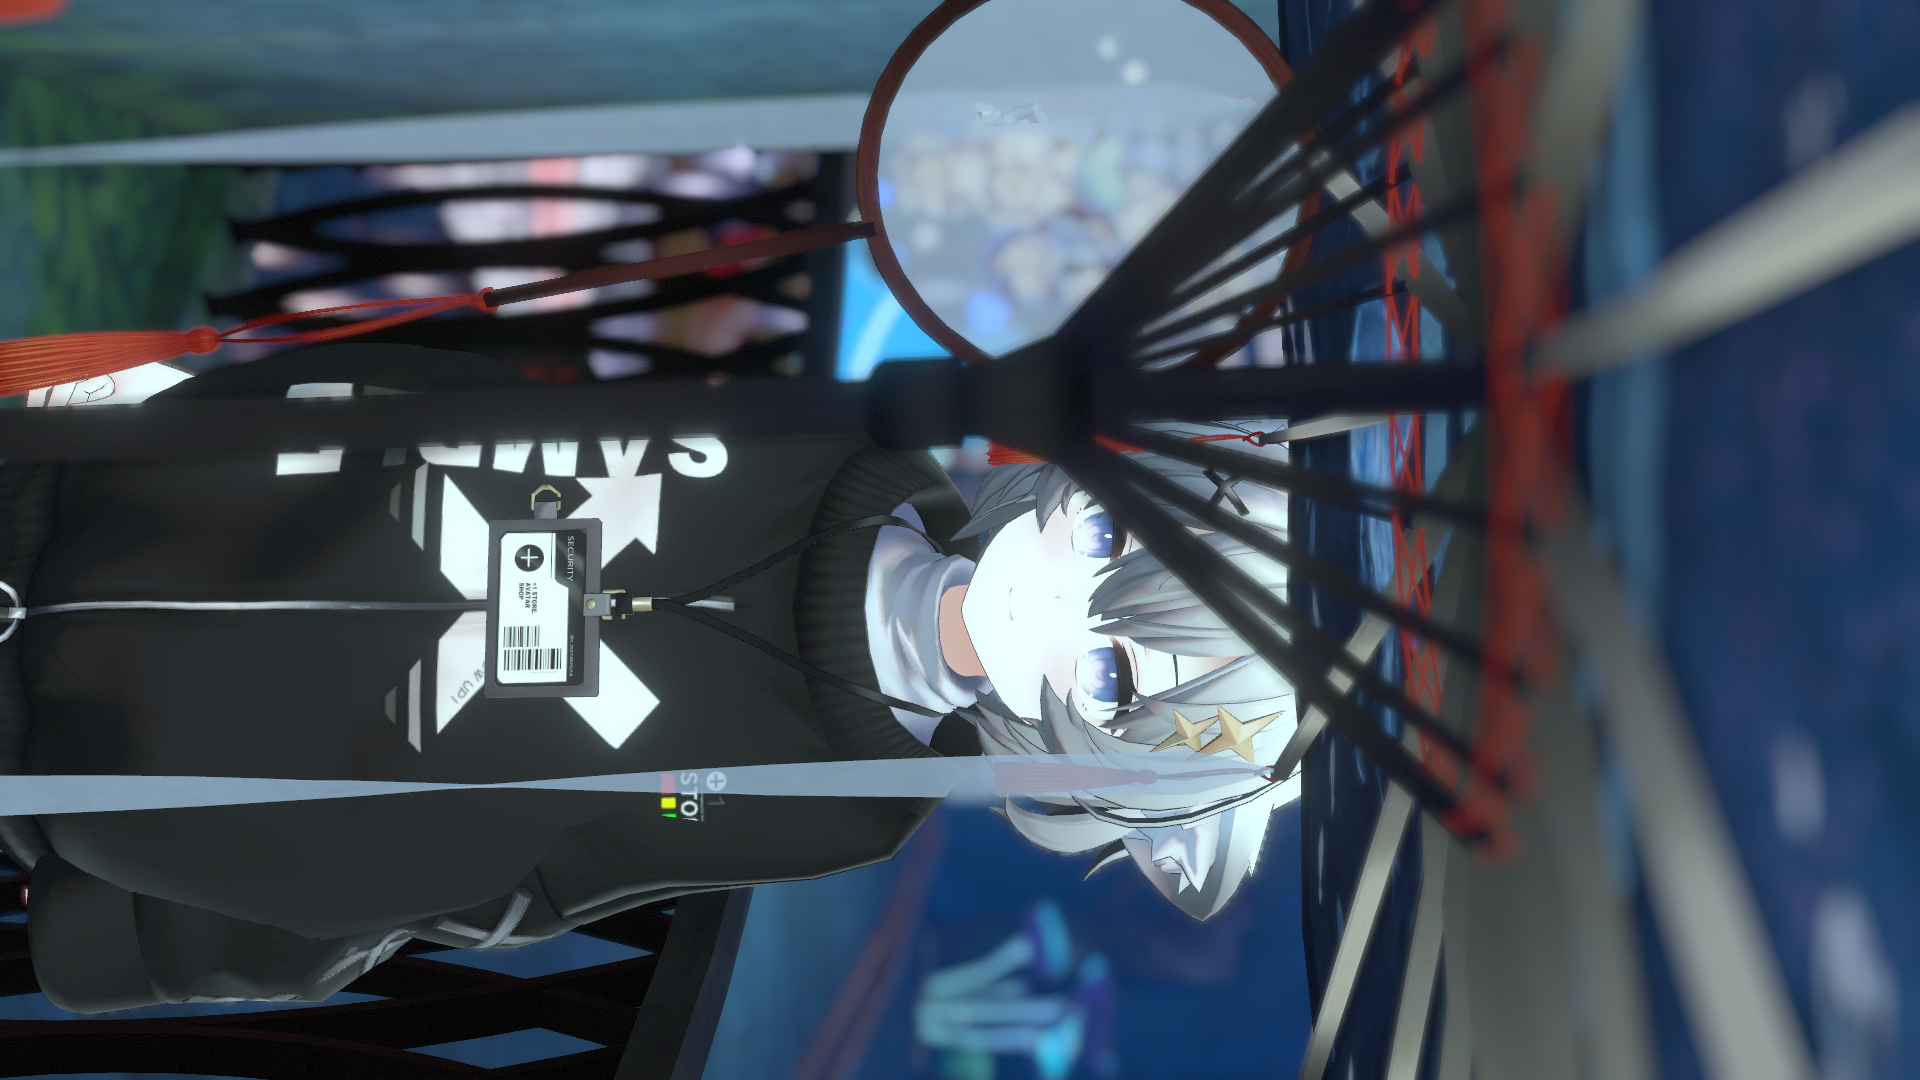 VRChat_1920x1080_2021-12-05_03-48-38.976.png